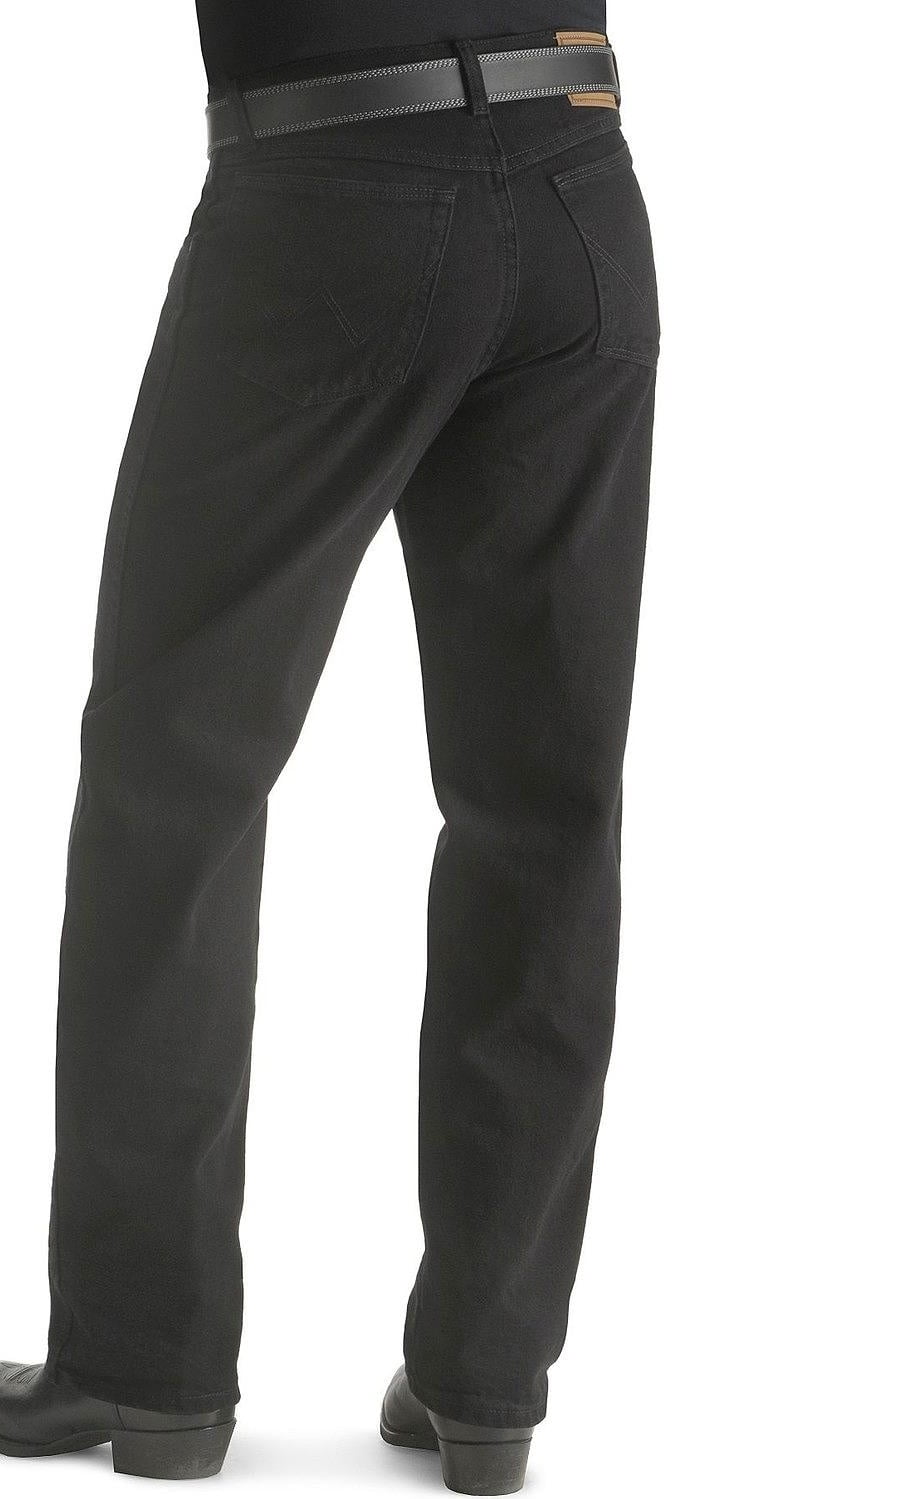 wrangler men's big rugged wear relaxed fit jean ,overdyed black,46x30 ...